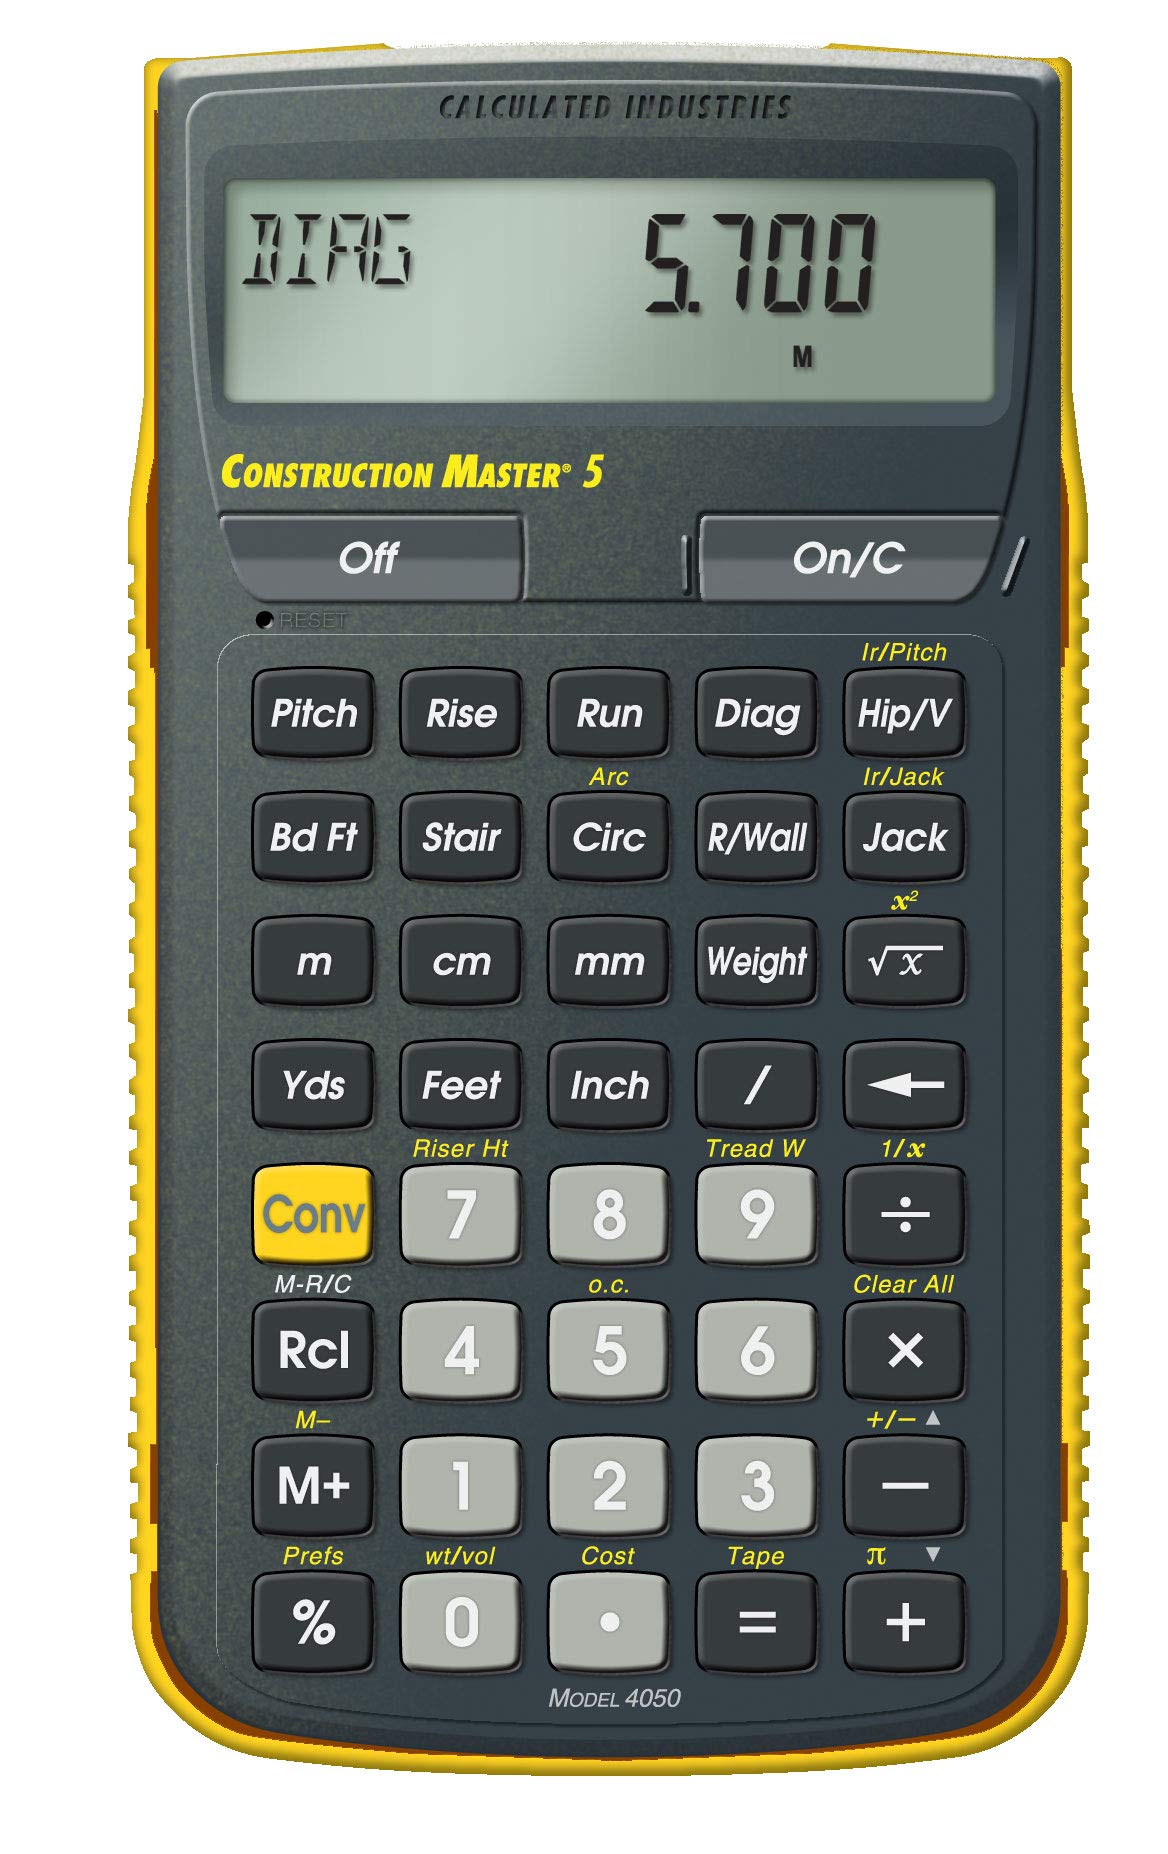 Calculated Industries 4050 Construction Master 5 Construction Calculator